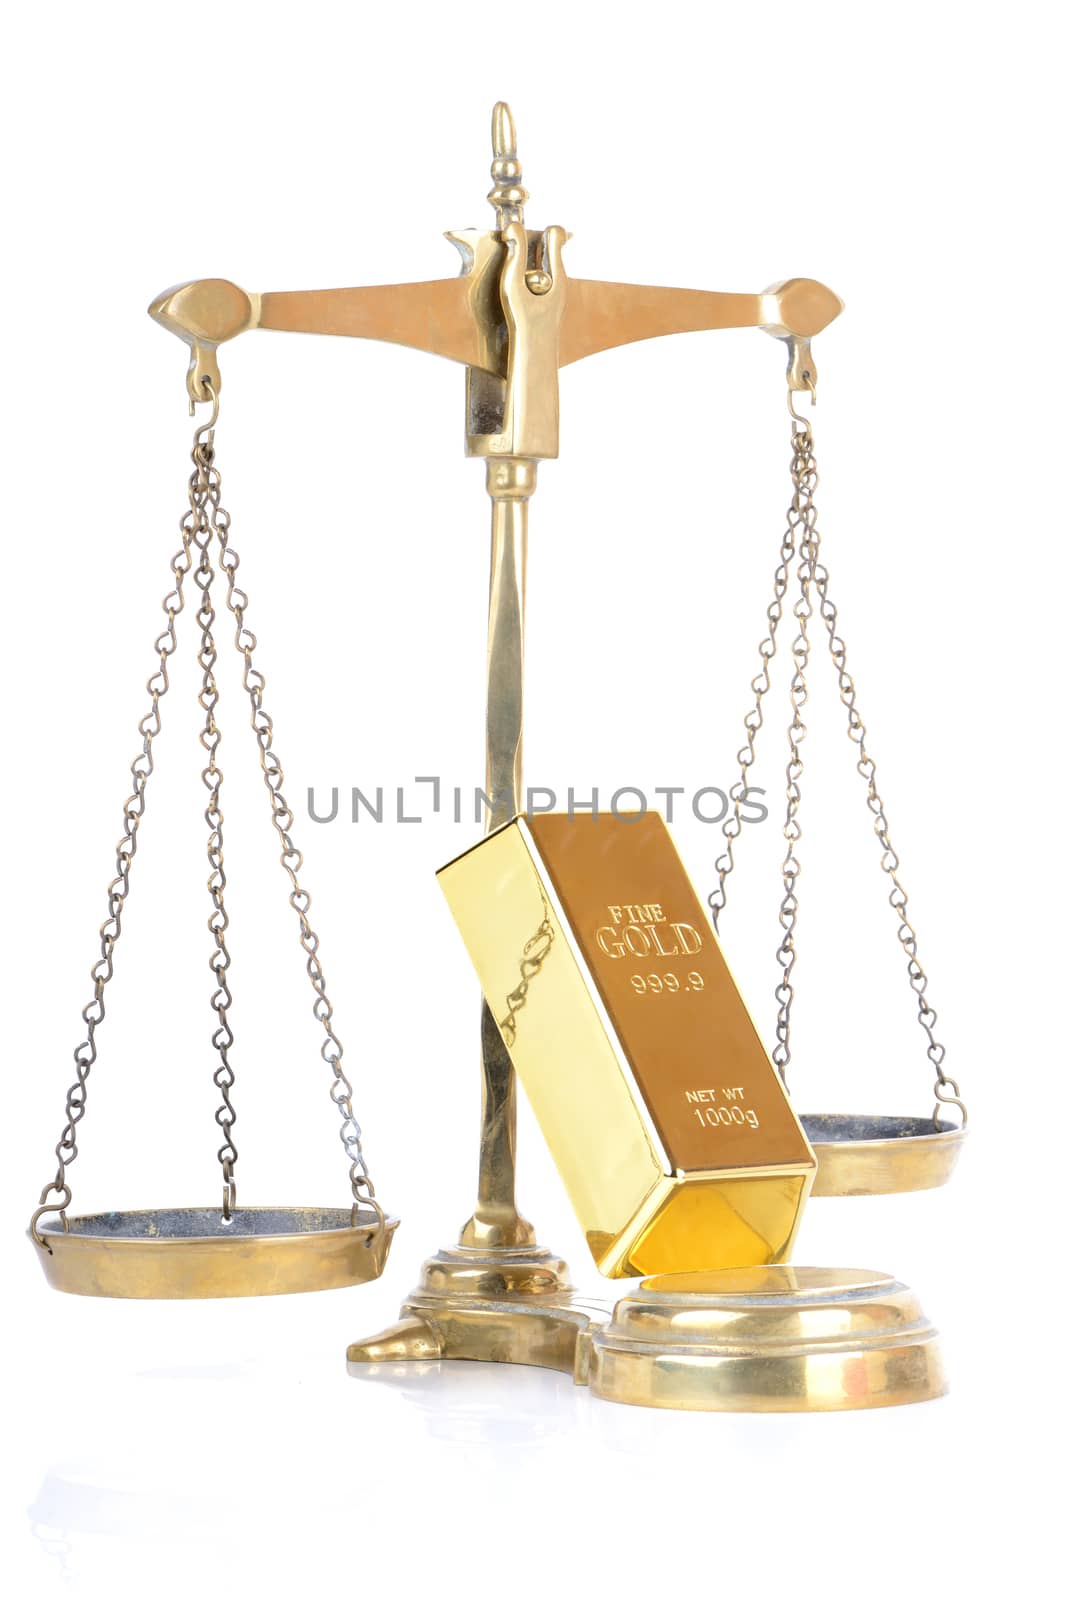 Large gold ingot on weight scales with a white background